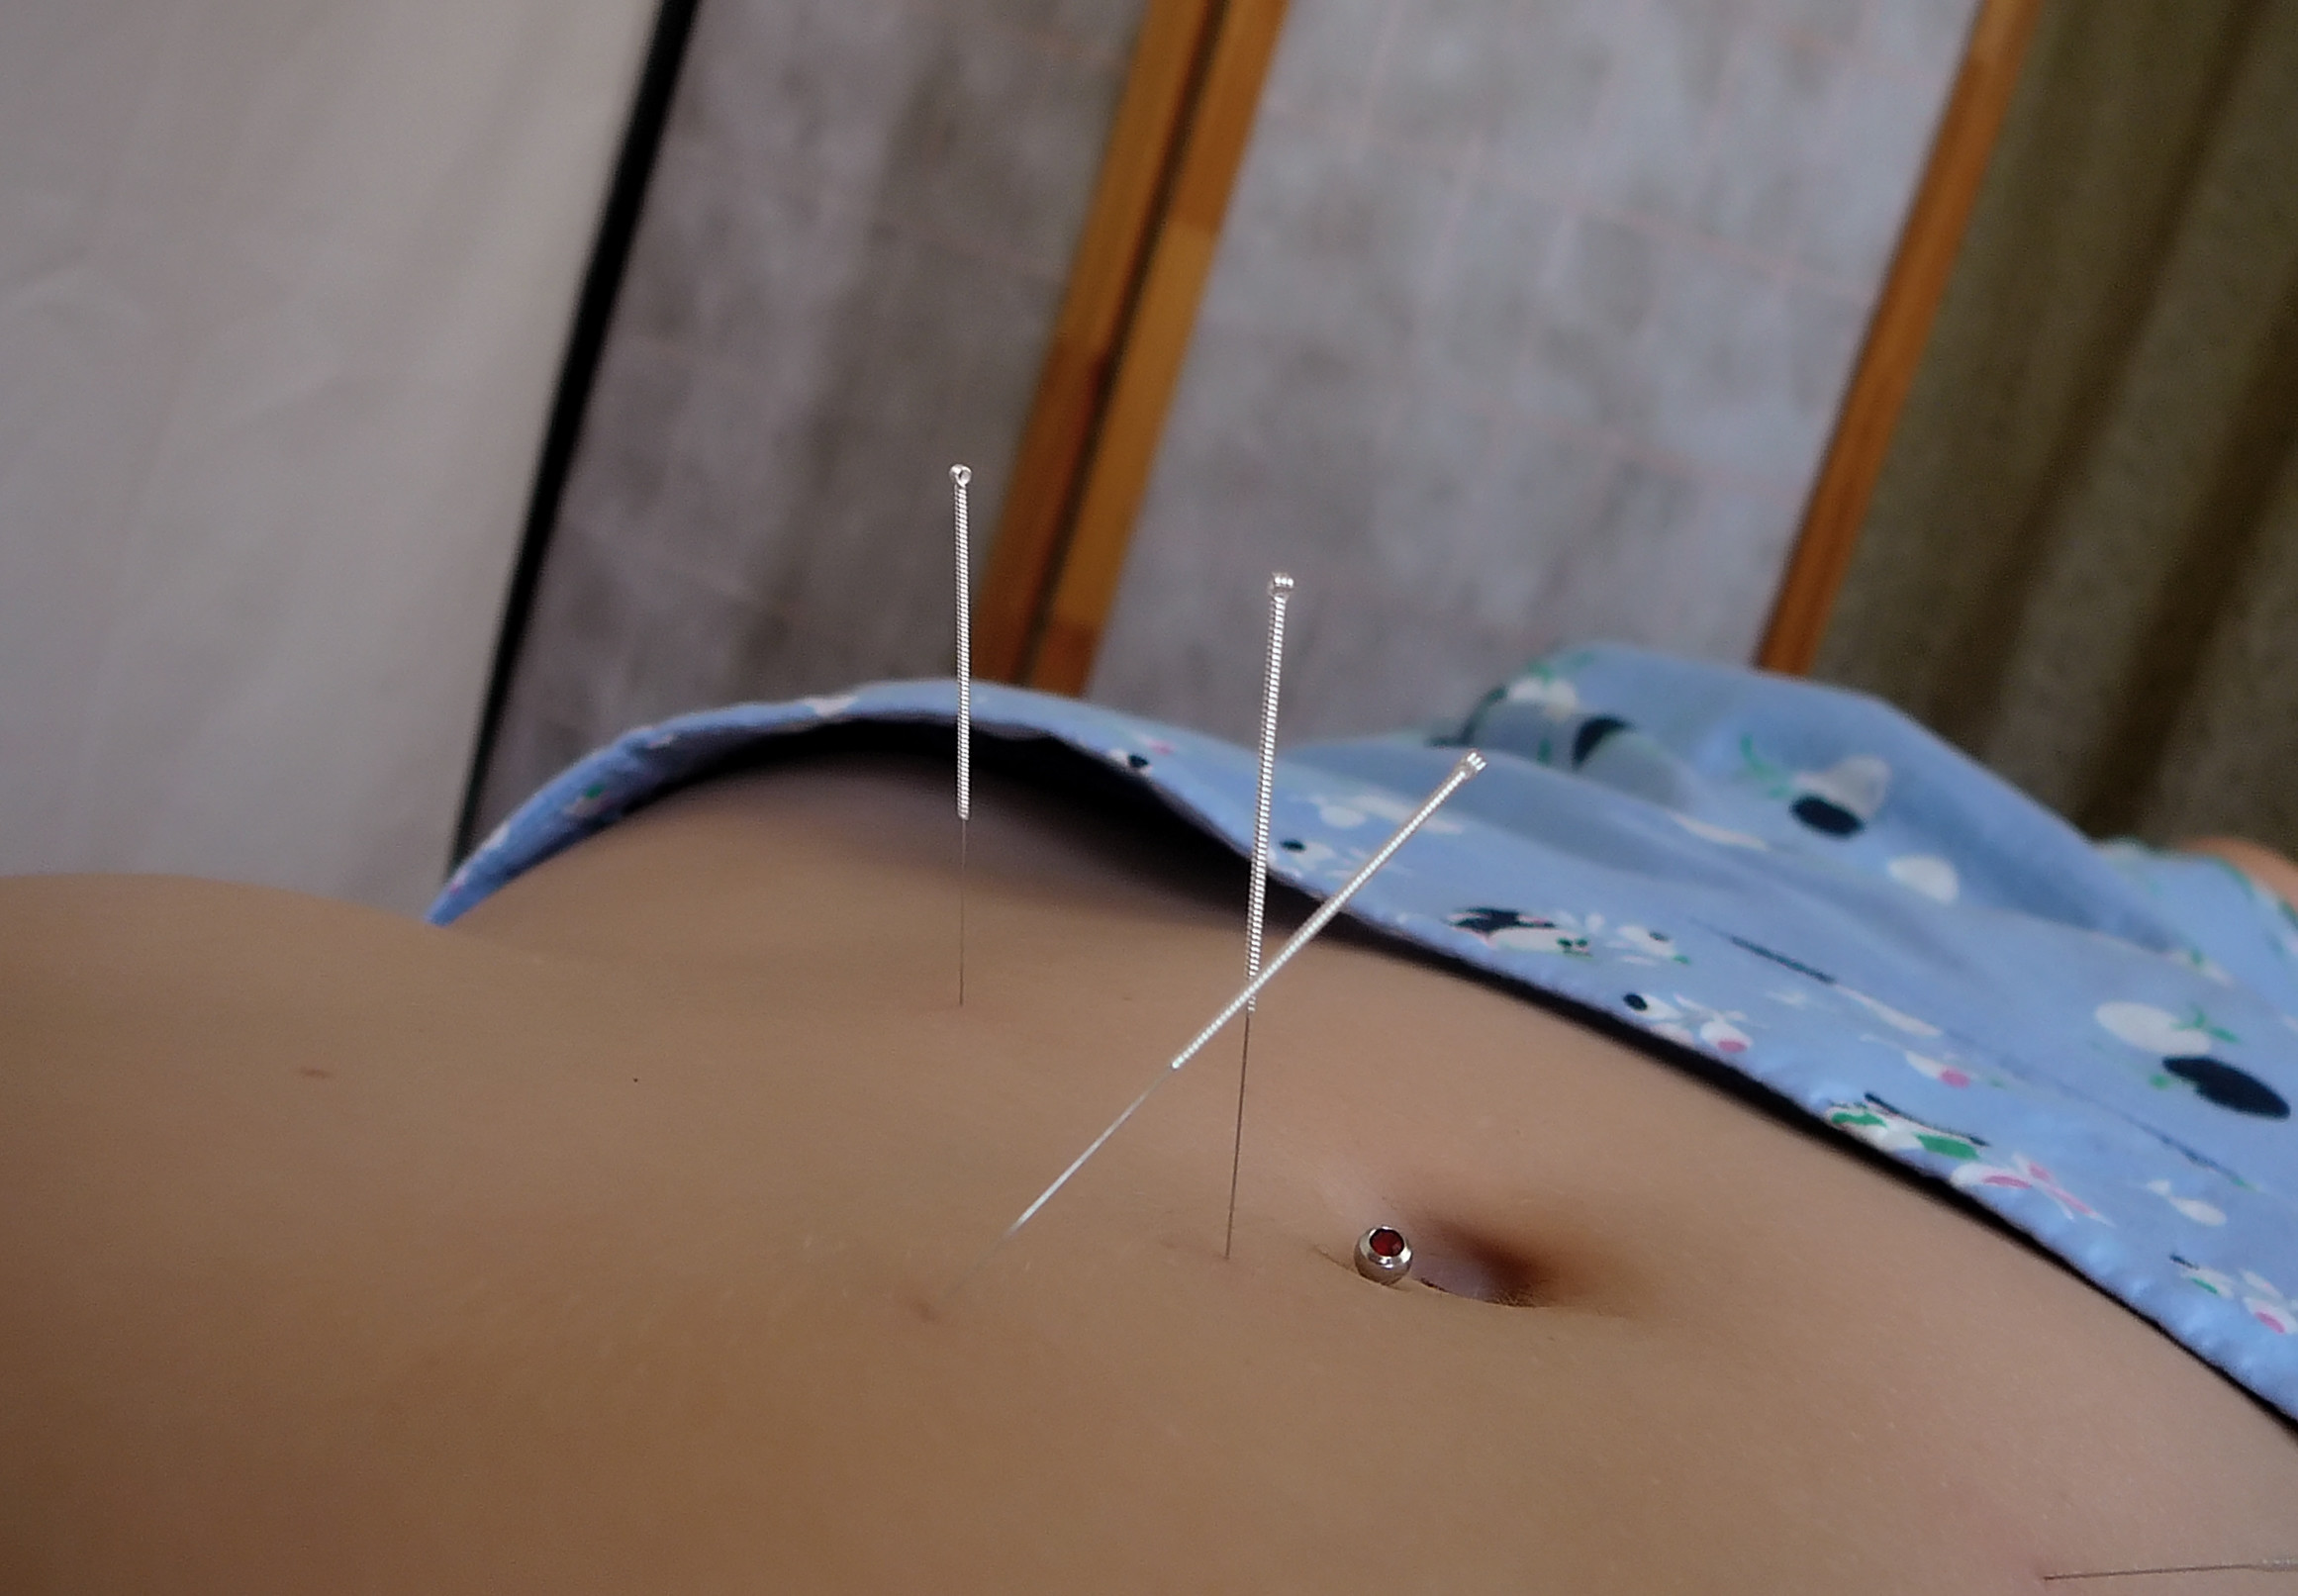 fertility acupuncture for women - increases the chances of getting pregnant when undergoing fertility treatment